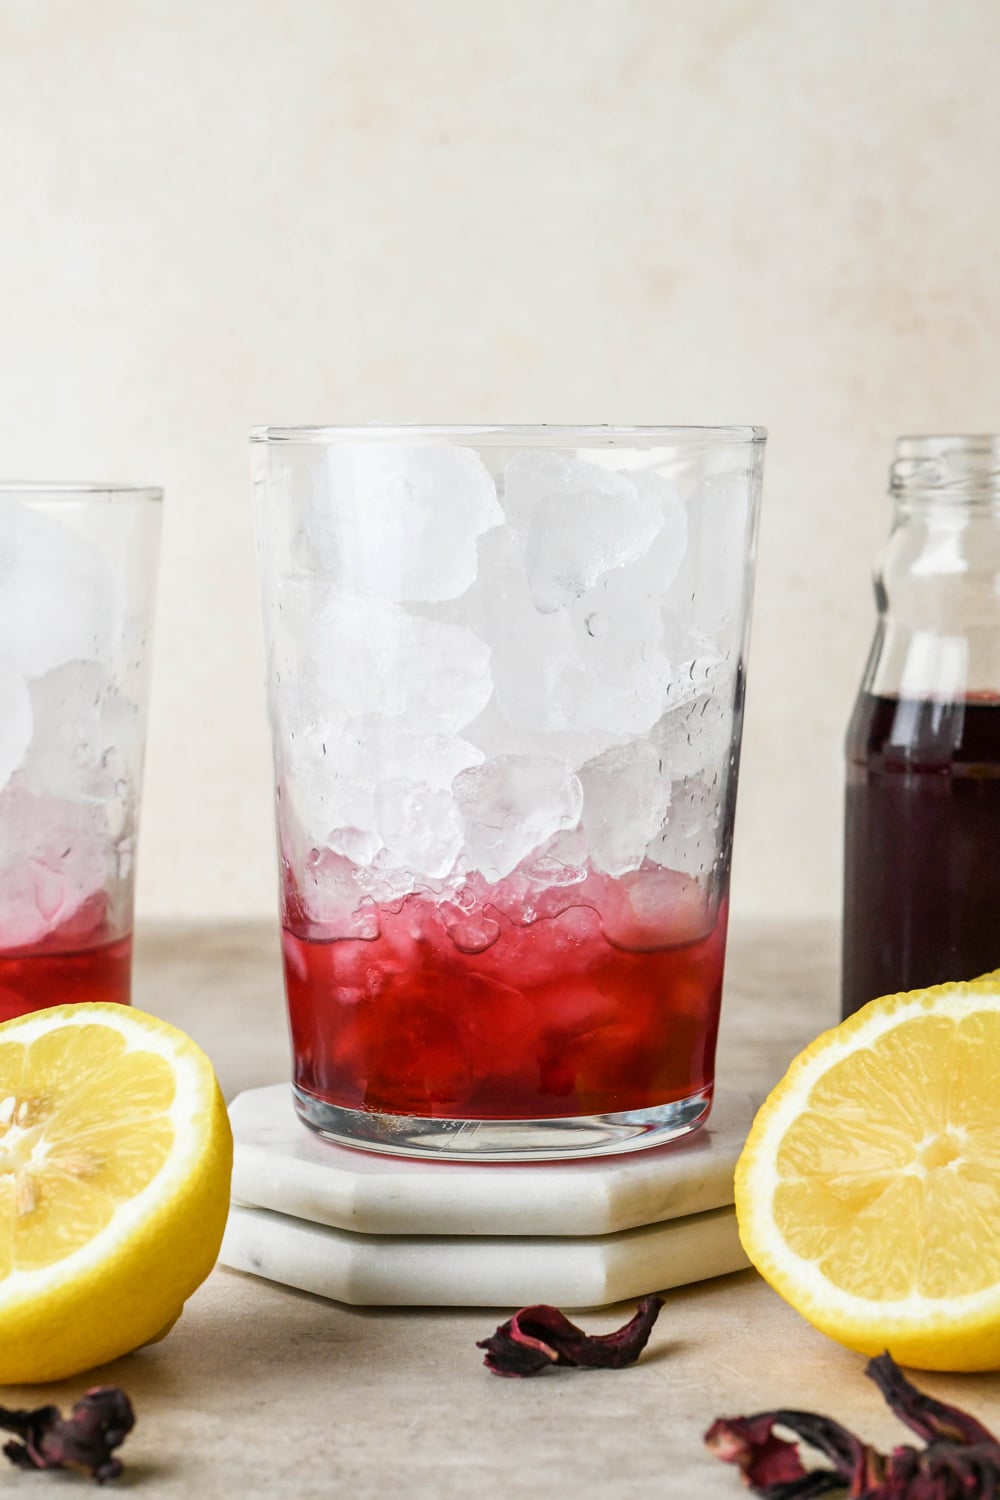 How to make hibiscus lemonade: Hibiscus concentrate and lemon juice in a glass with ice.